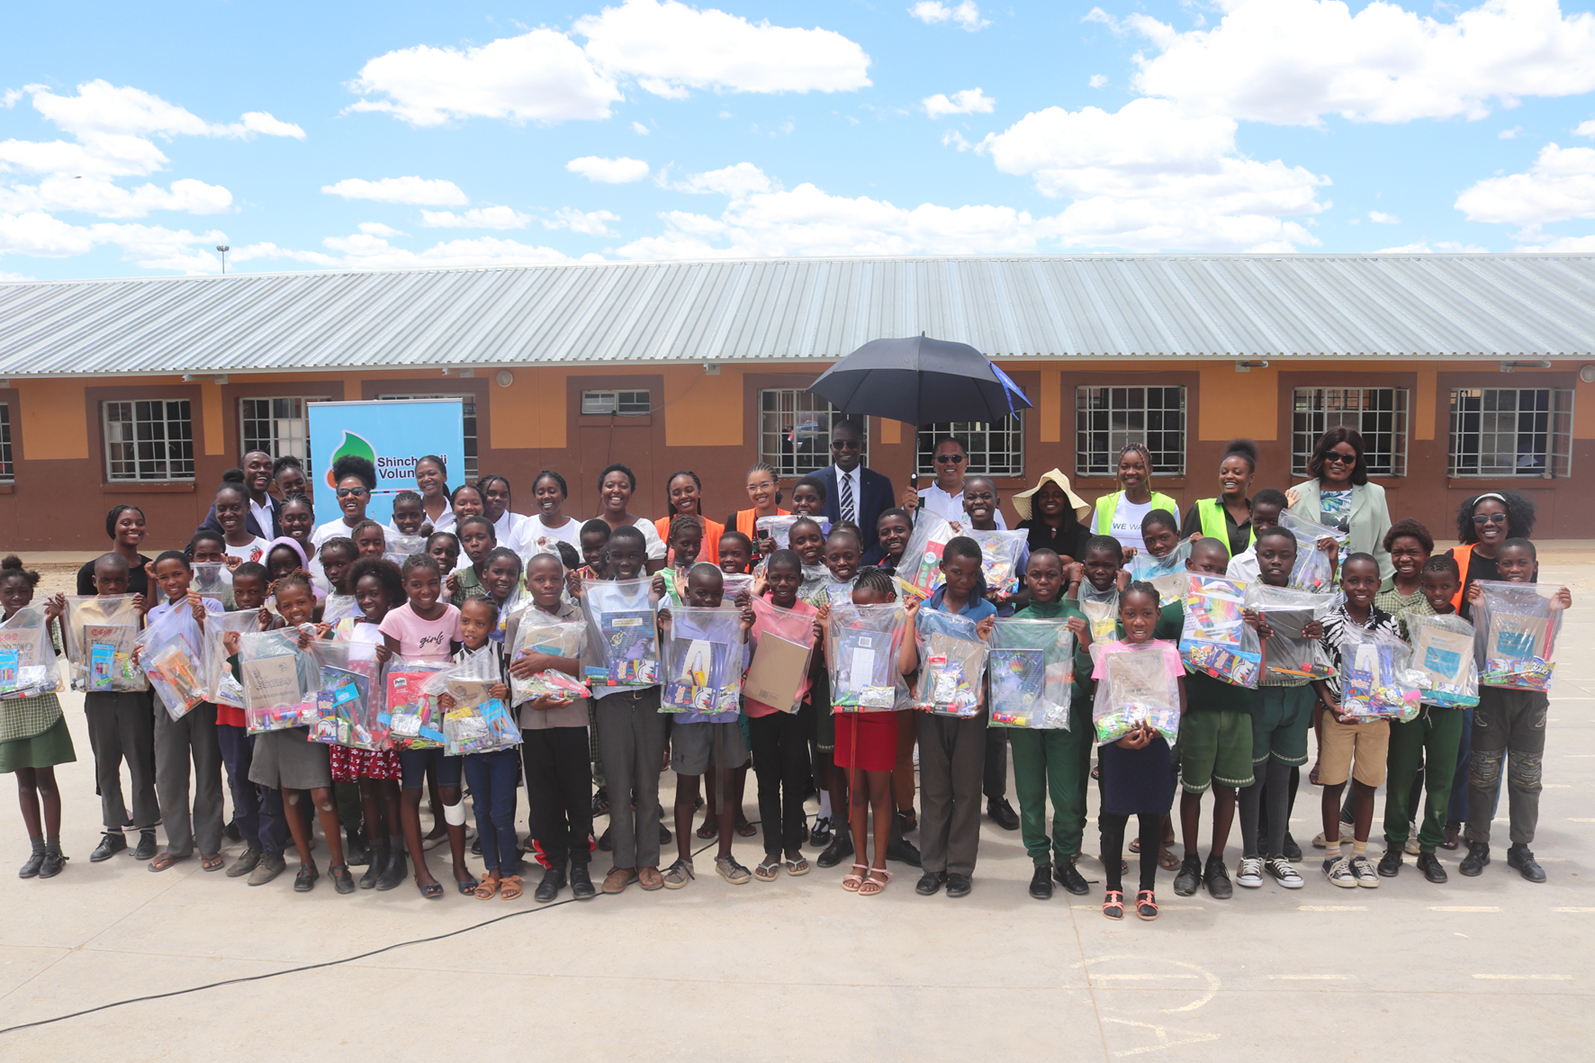 Shincheonji church hands over stationery to underserved learners